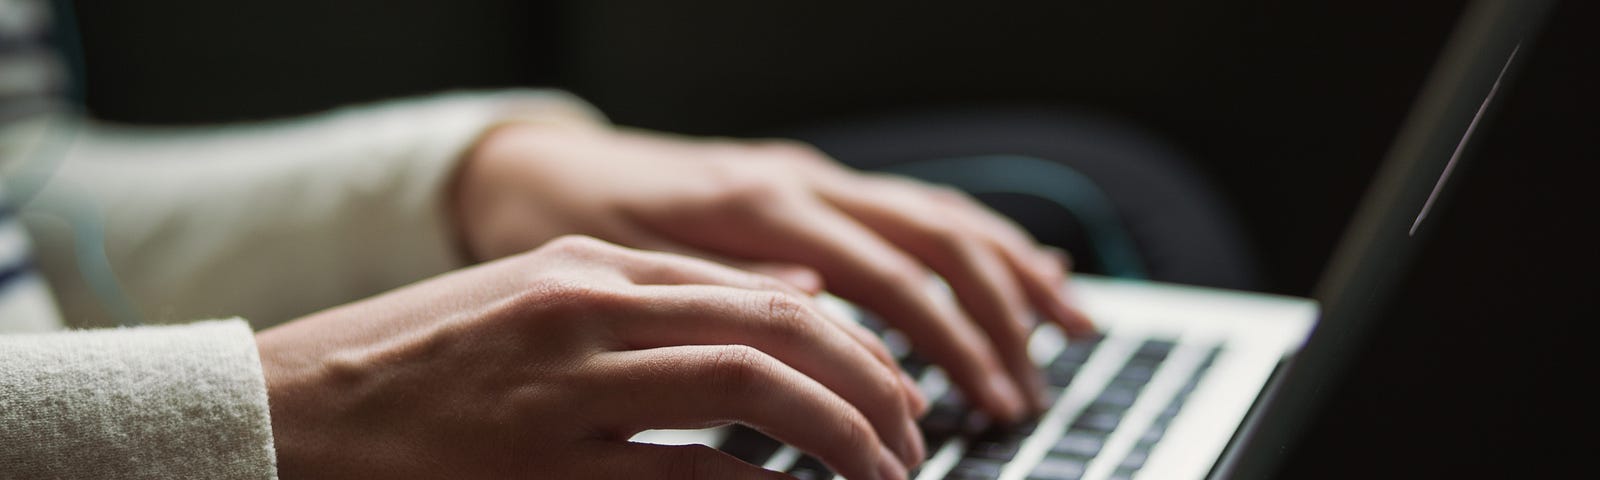 A close-up image shows a person poised with two hands hovering over a laptop keyboard, in the middle of typing.